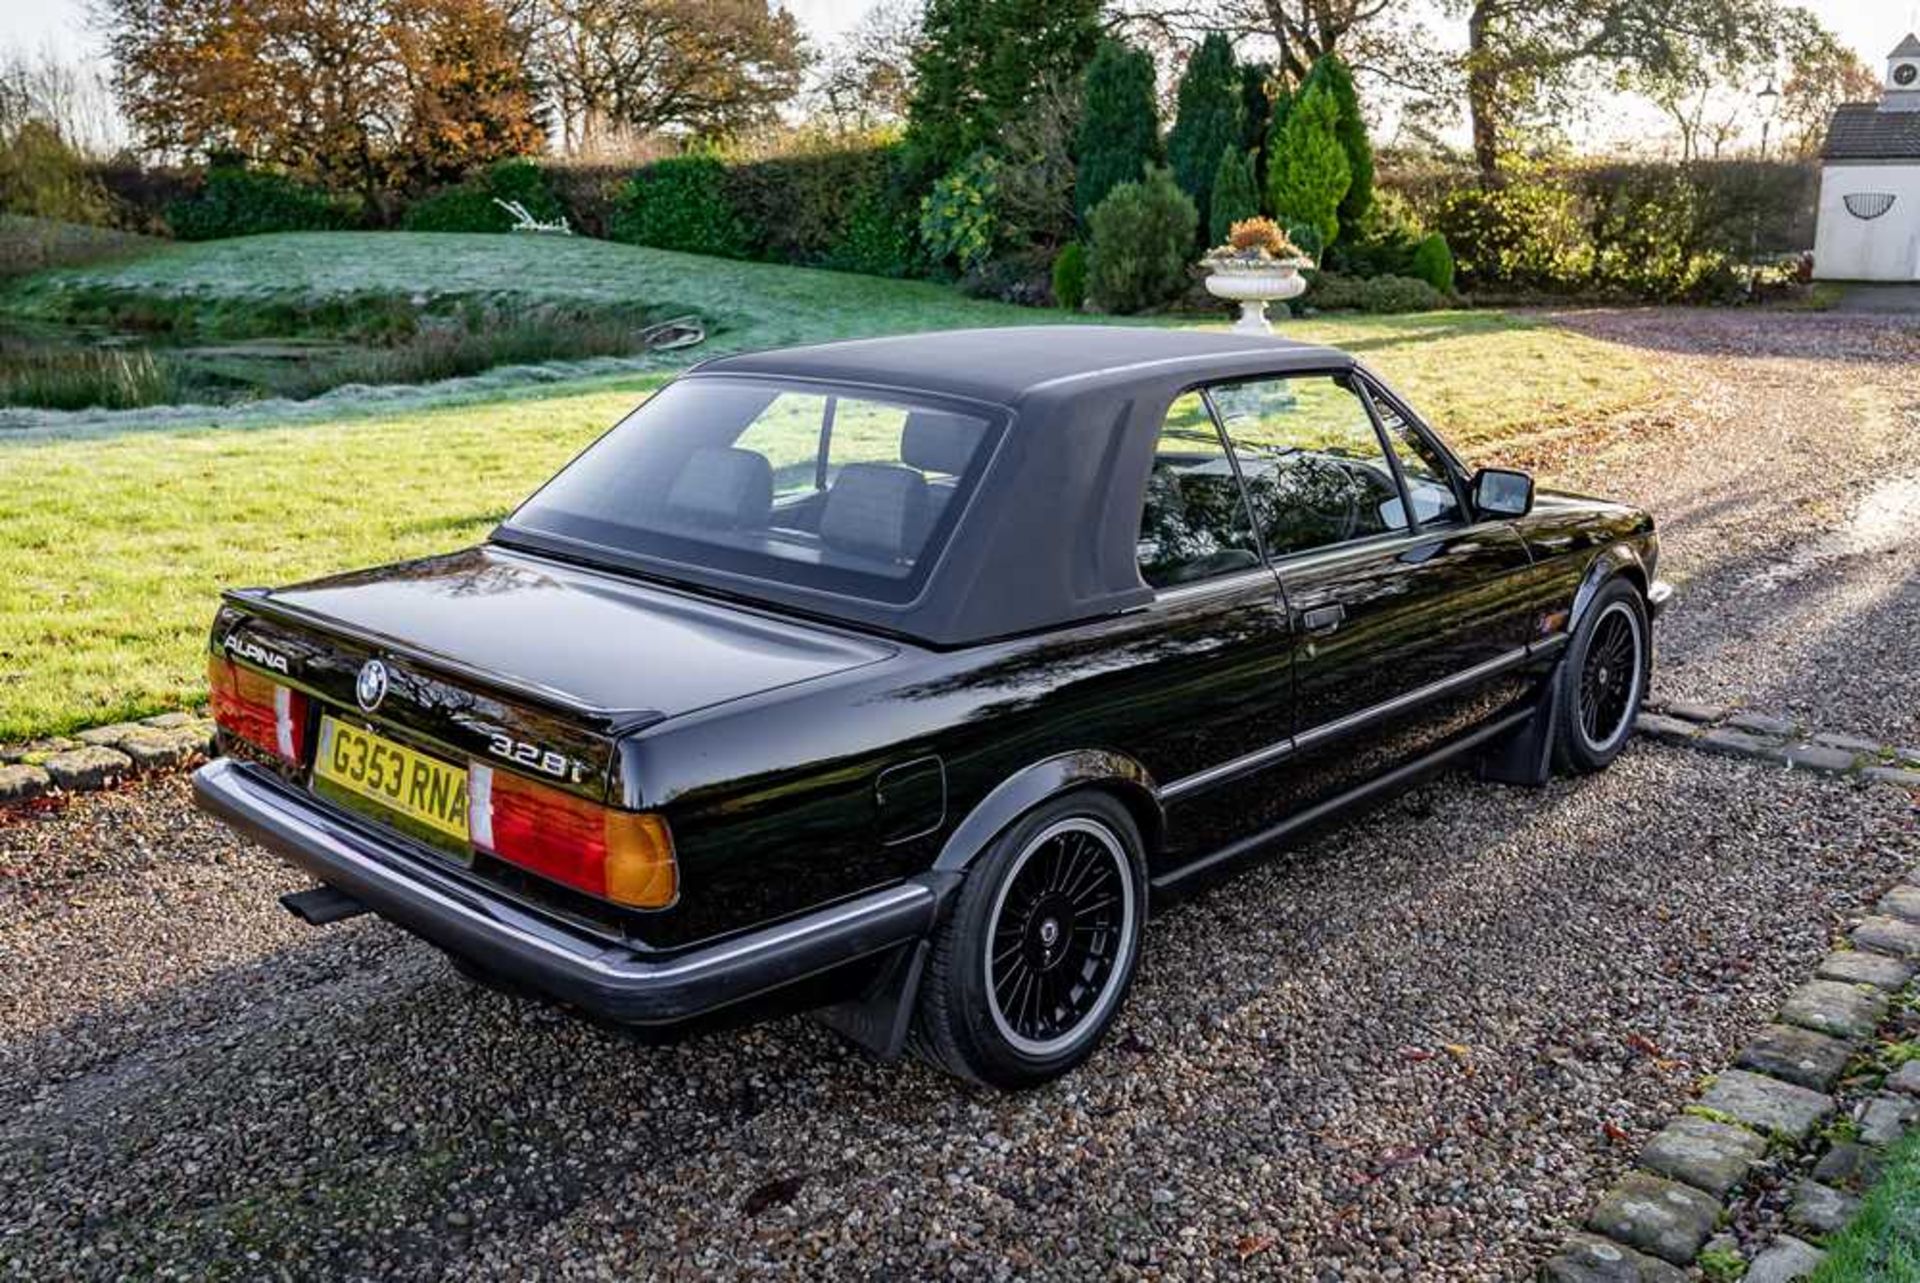 1989 BMW 320i Convertible Converted to Alpina 328i Specification - Image 14 of 51